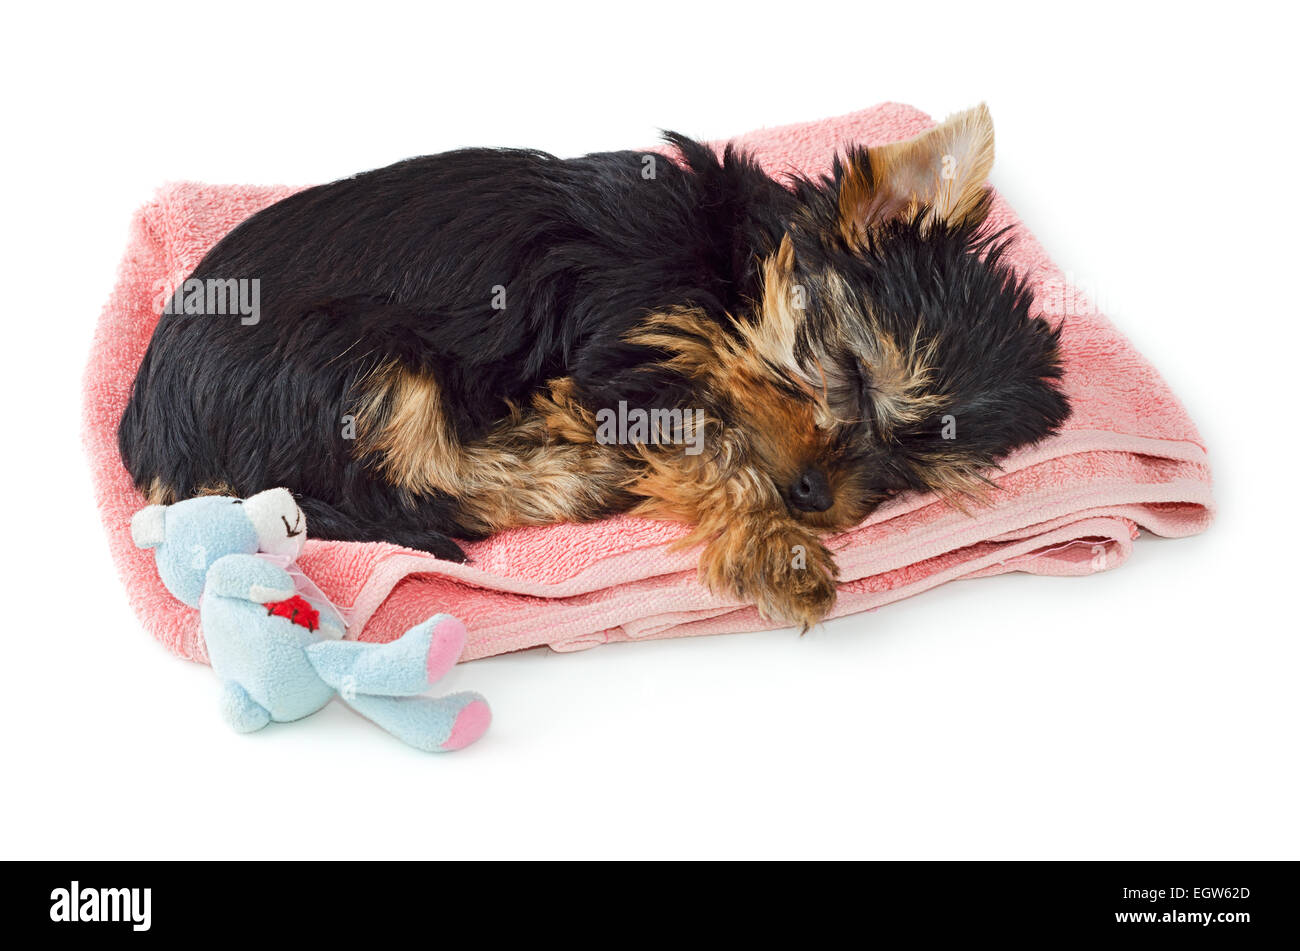 2 months old Yorkshire Terrier puppy sleeping on pink towel with toy isolated on white background Stock Photo